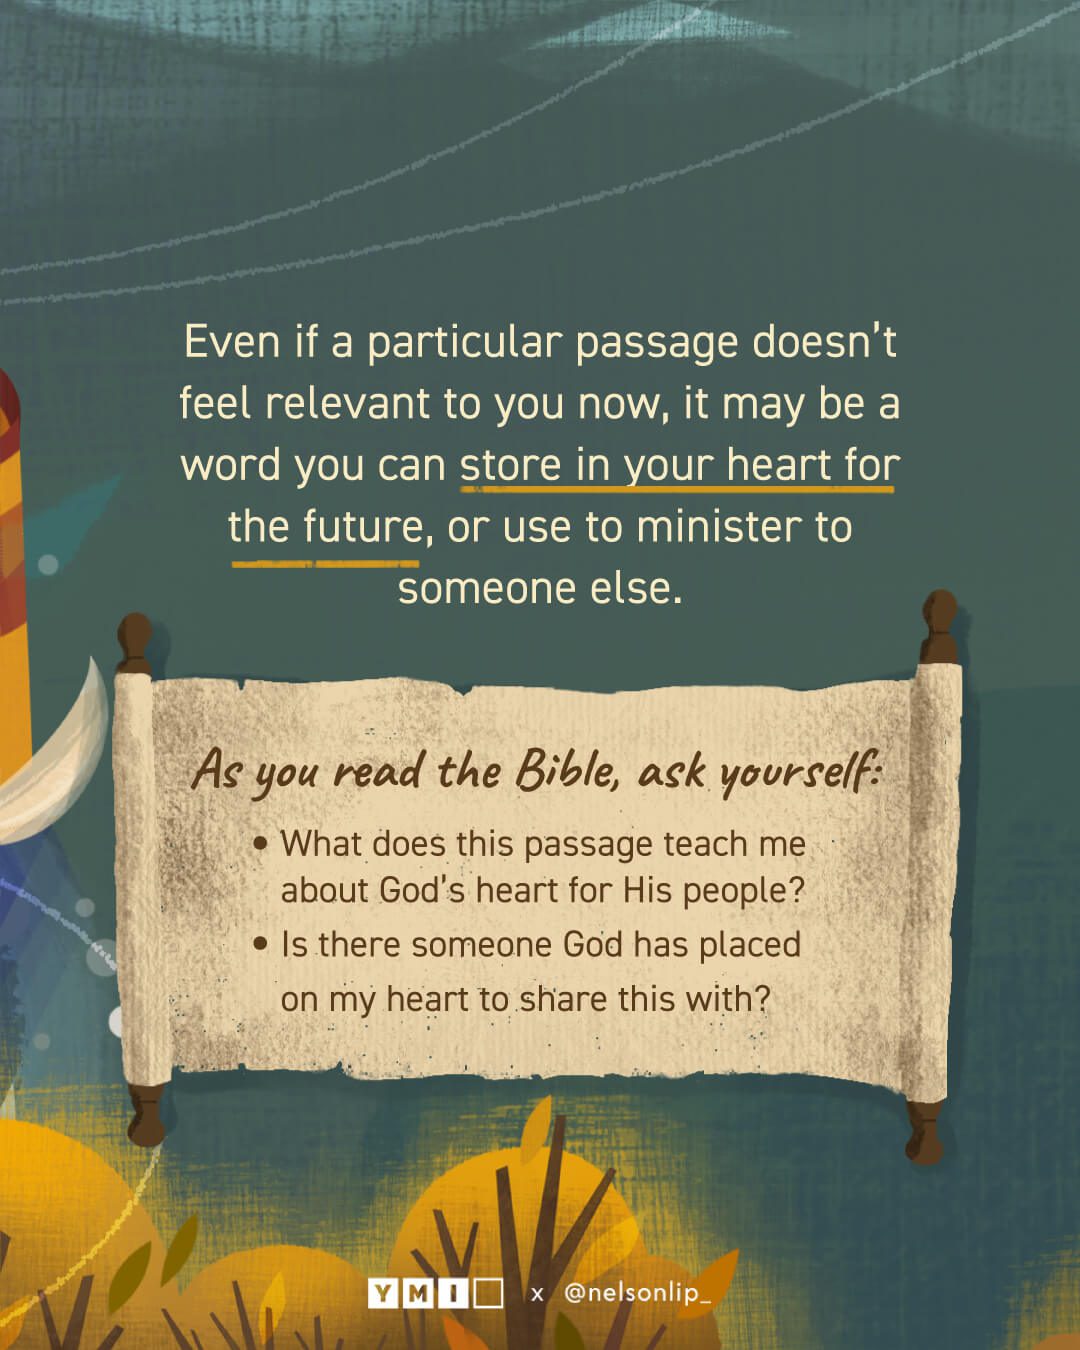 Background with the text of "Even if a particular passage doesn’t feel relevant to you now, it may be a word you can store in your heart for the future, or use to minister to someone else." An open scroll with the questions of "As you read the Bible, ask yourself: -What does this passage teach me about God’s heart for His people? -Is there someone God has placed on my heart to share this with?" 